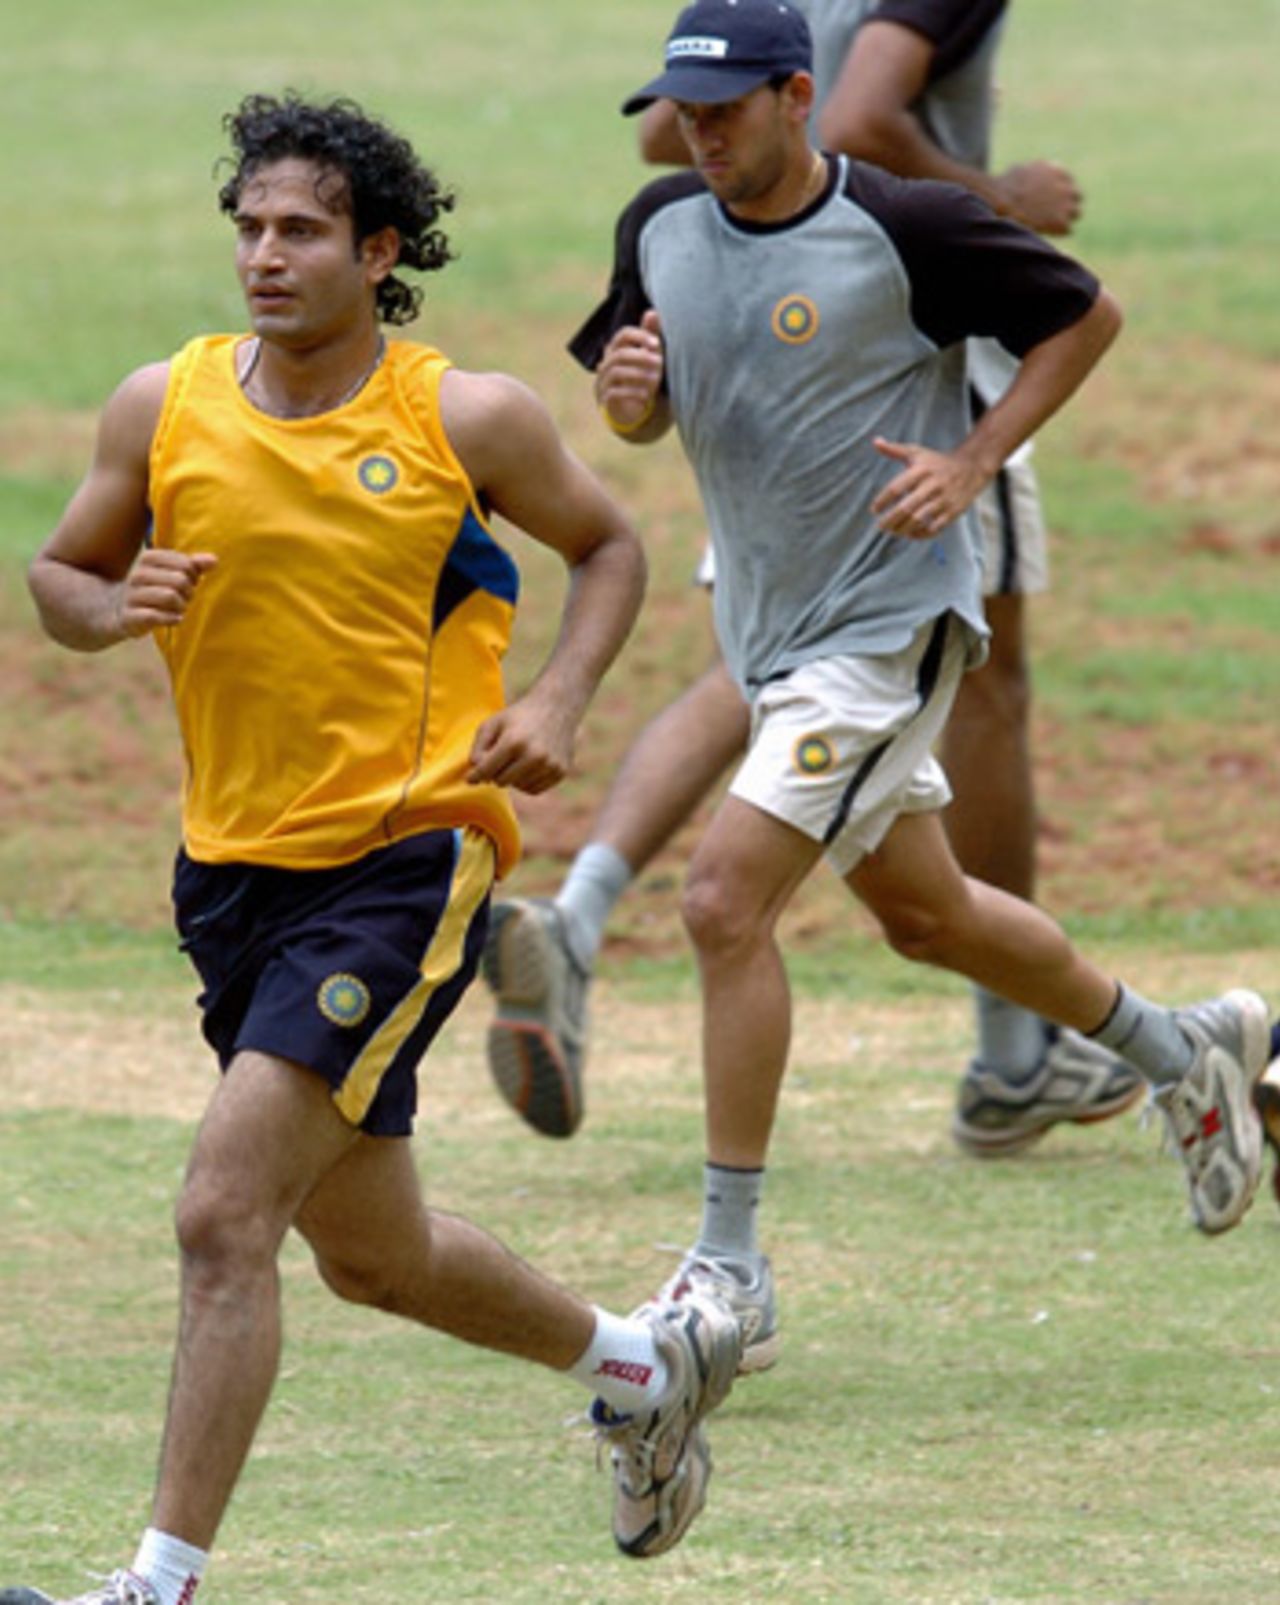 Ajit Agarkar and Irfan Pathan jogging during a practice session, Bangalore, July 11, 2005